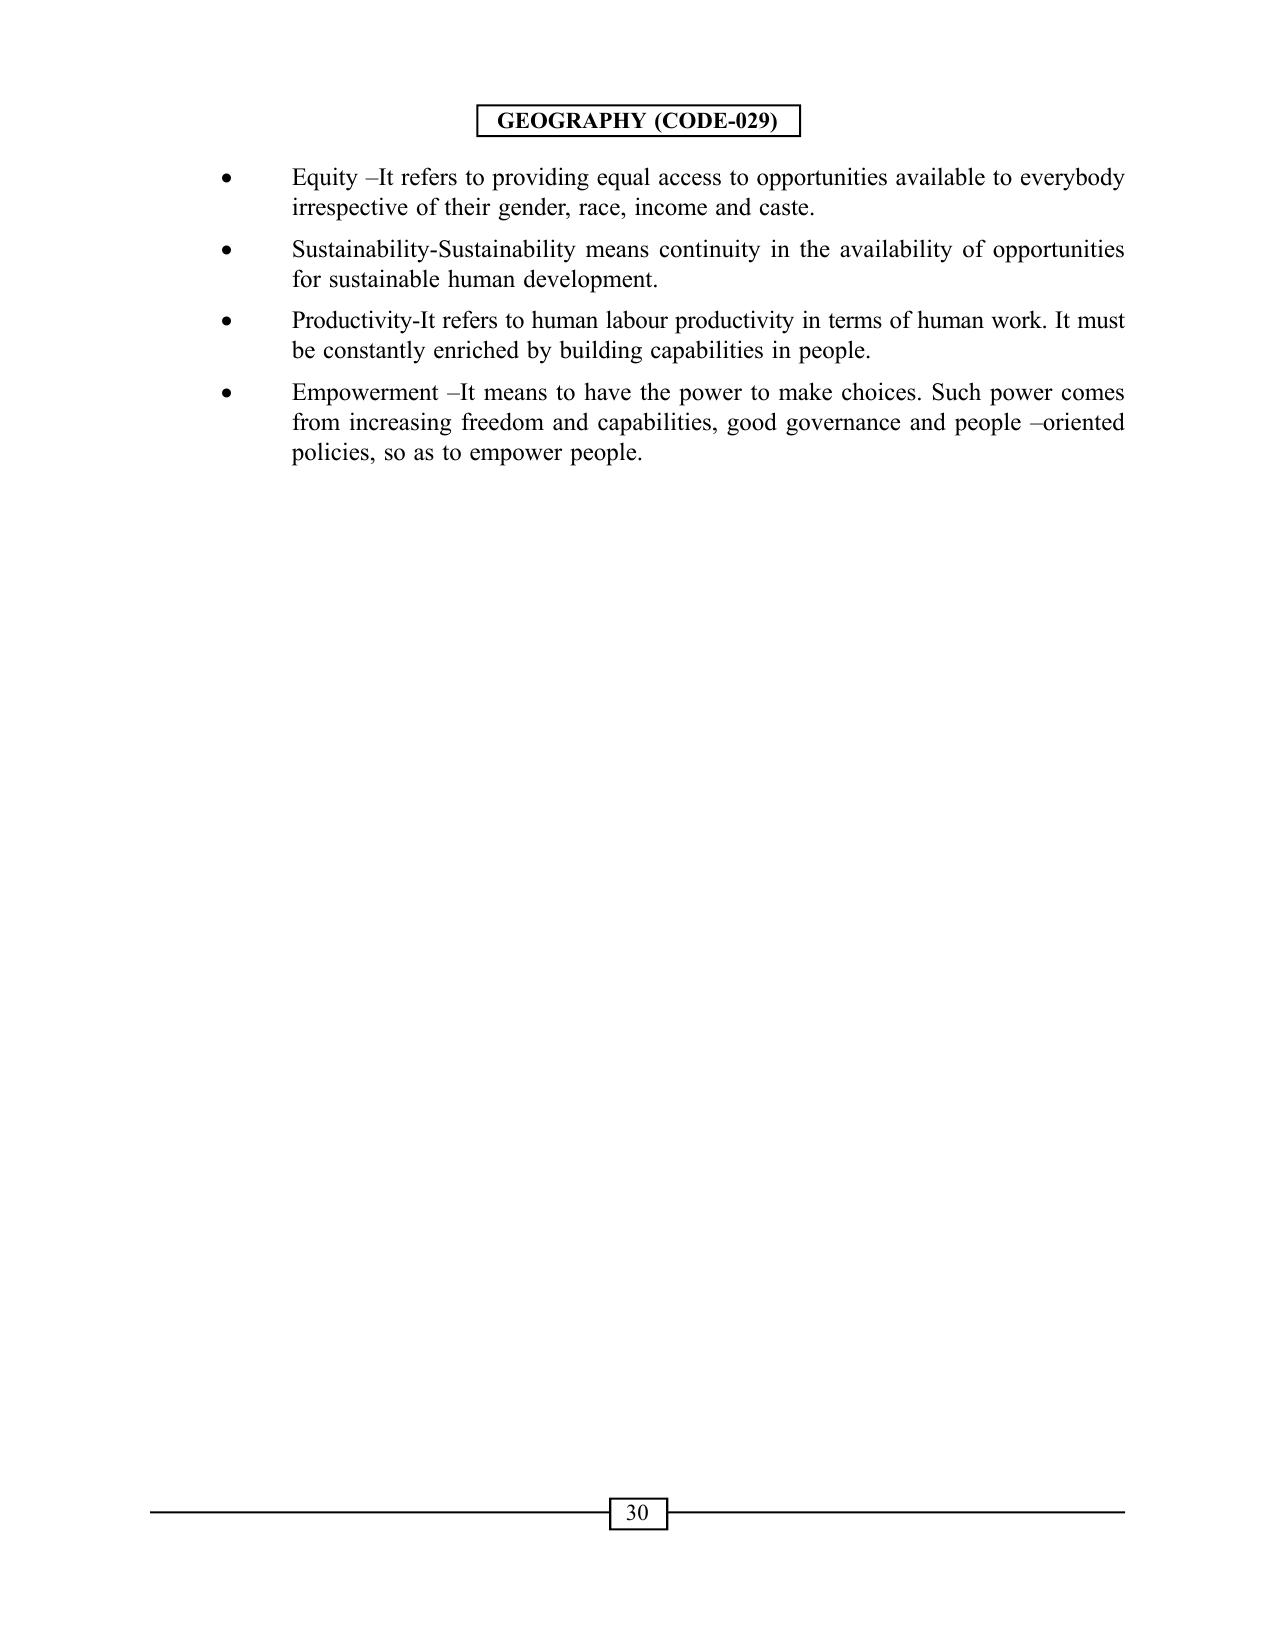 CBSE Worksheets for Class 12 Geography Human Development - Page 4